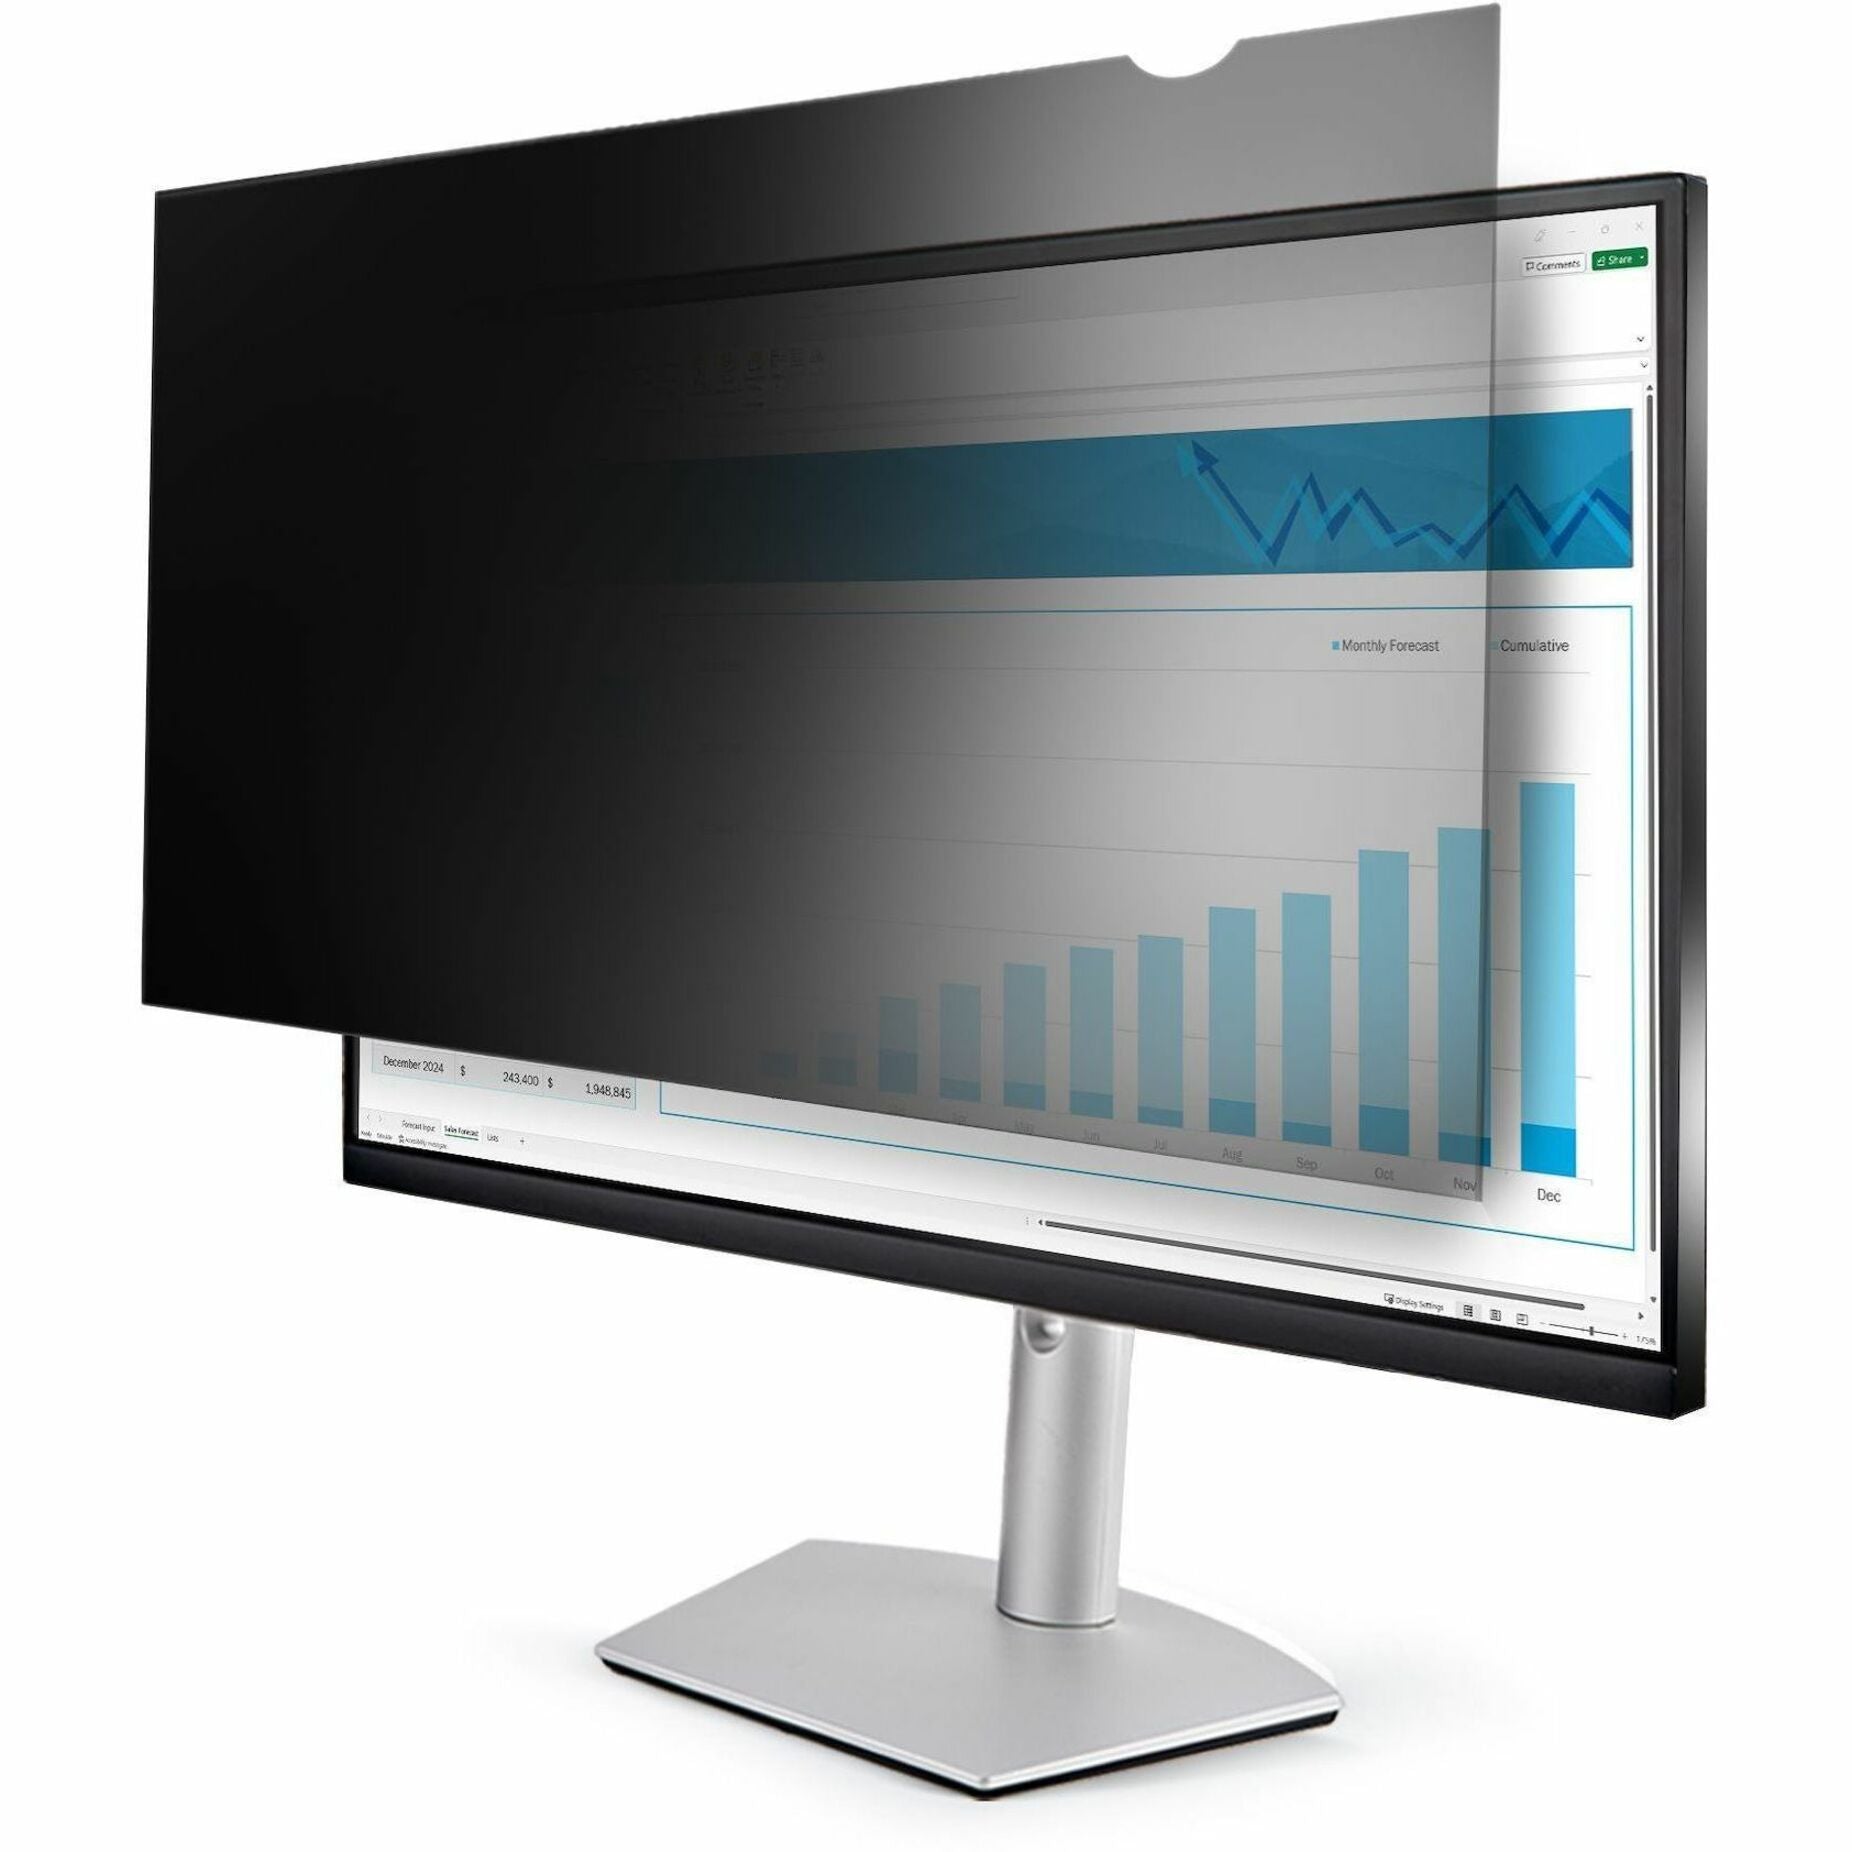 StarTech.com PRIVSCNMON27 Monitor Privacy Screen - 27 in. Universal, Matte or Glossy, Blue Light Reduction, Confidentiality Screen Filter